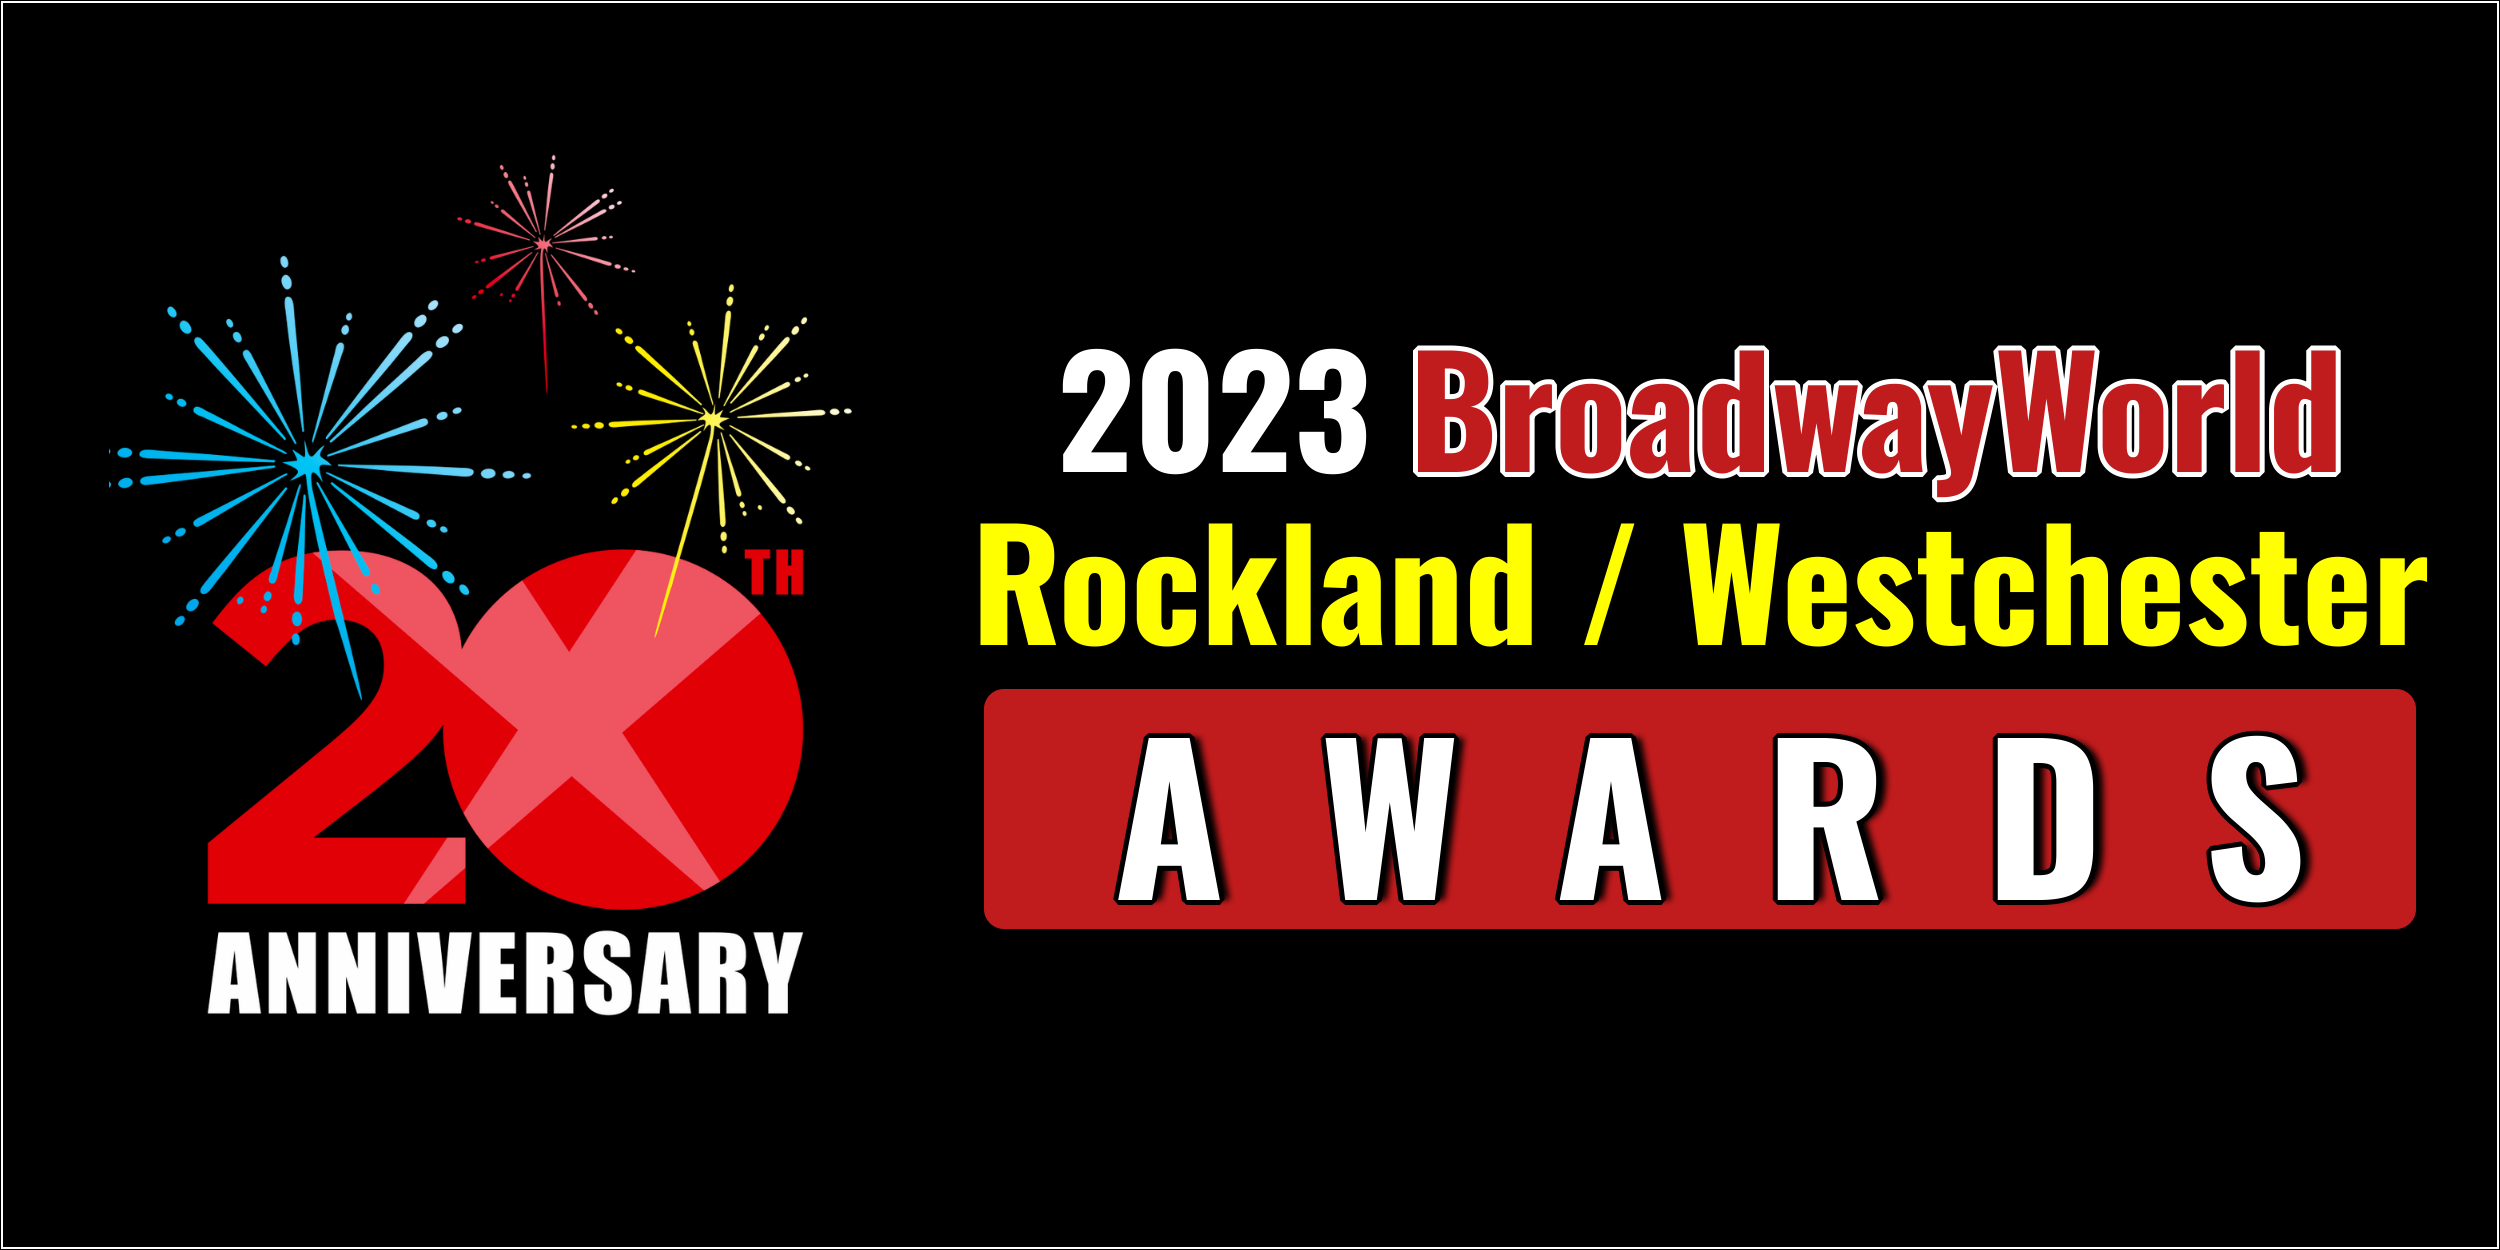 Latest Standings Announced For The 2023 BroadwayWorld Rockland / Westchester Awards; RED Leads Best Play! 